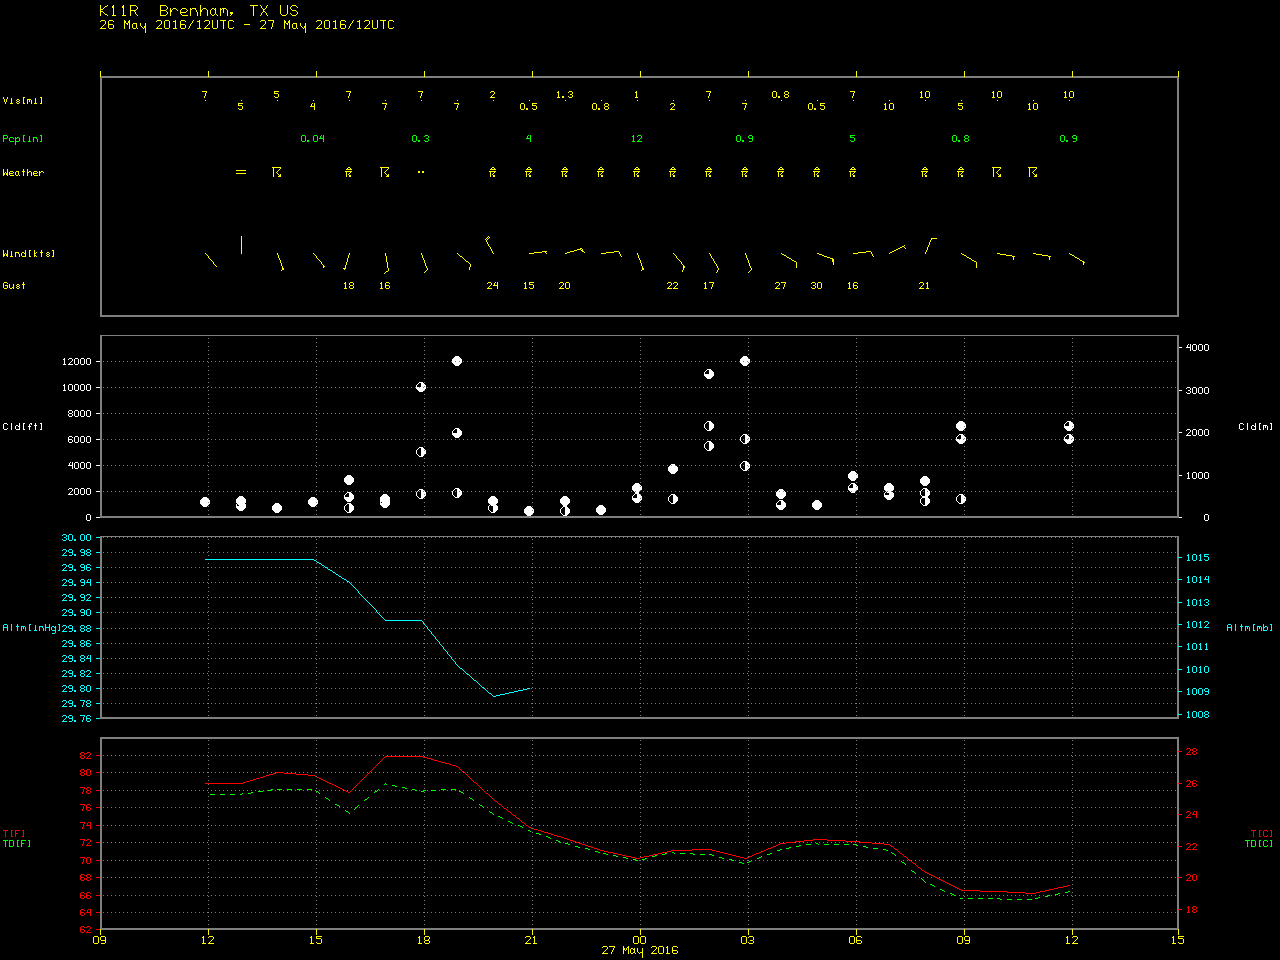 Time series plot of surface weather conditions at Brenham, Texas [click to enlarge]